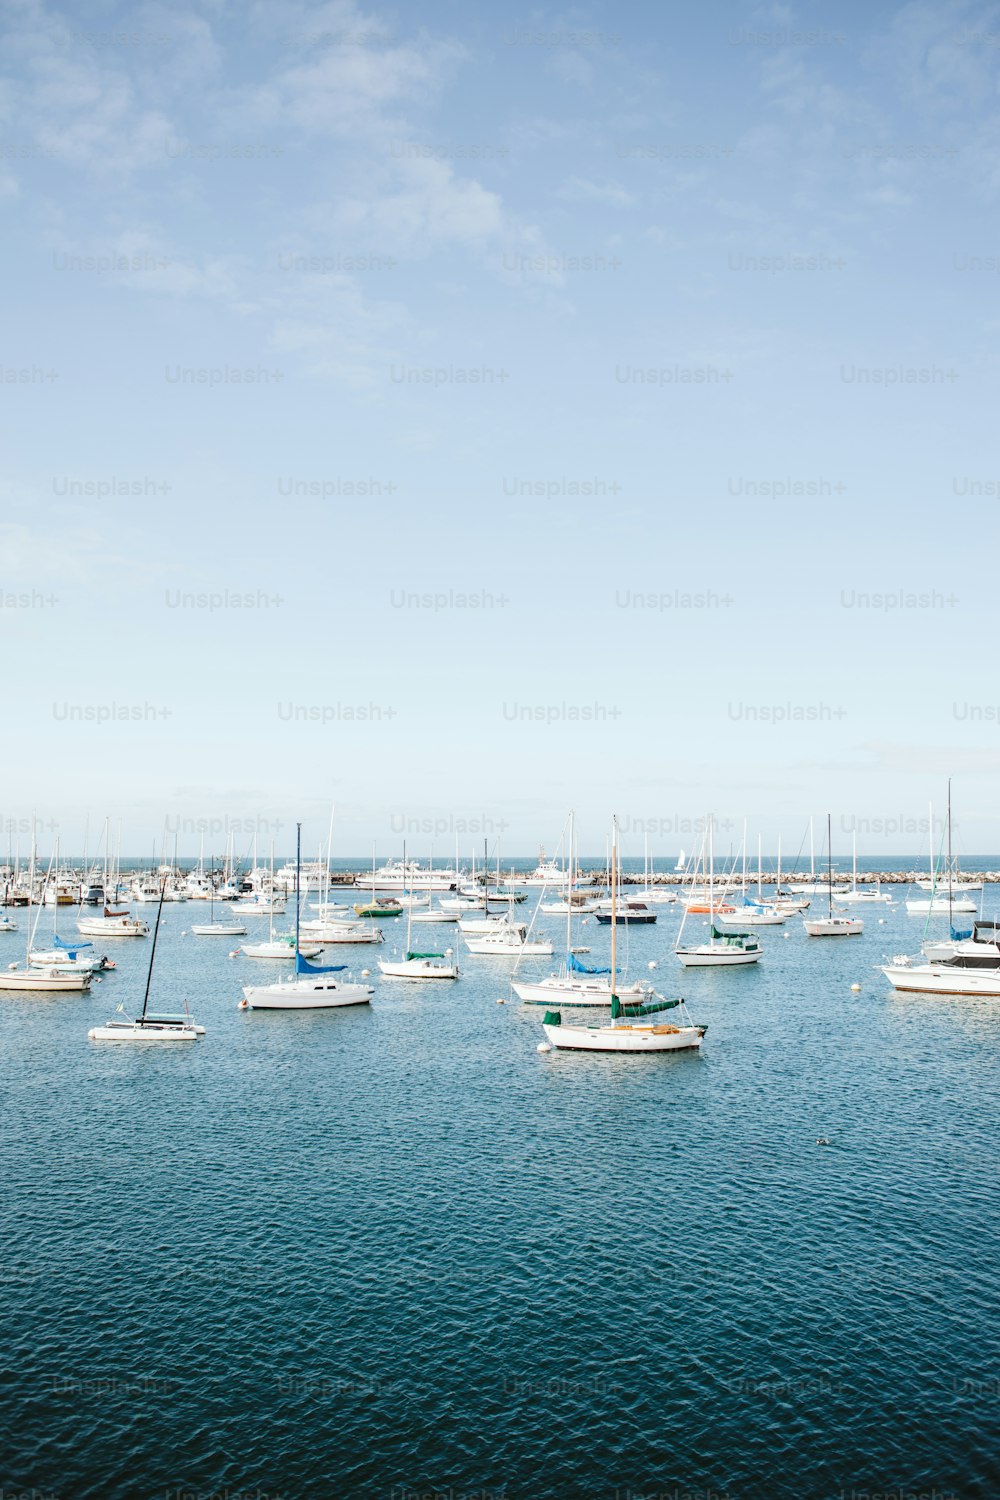 a large body of water filled with lots of boats